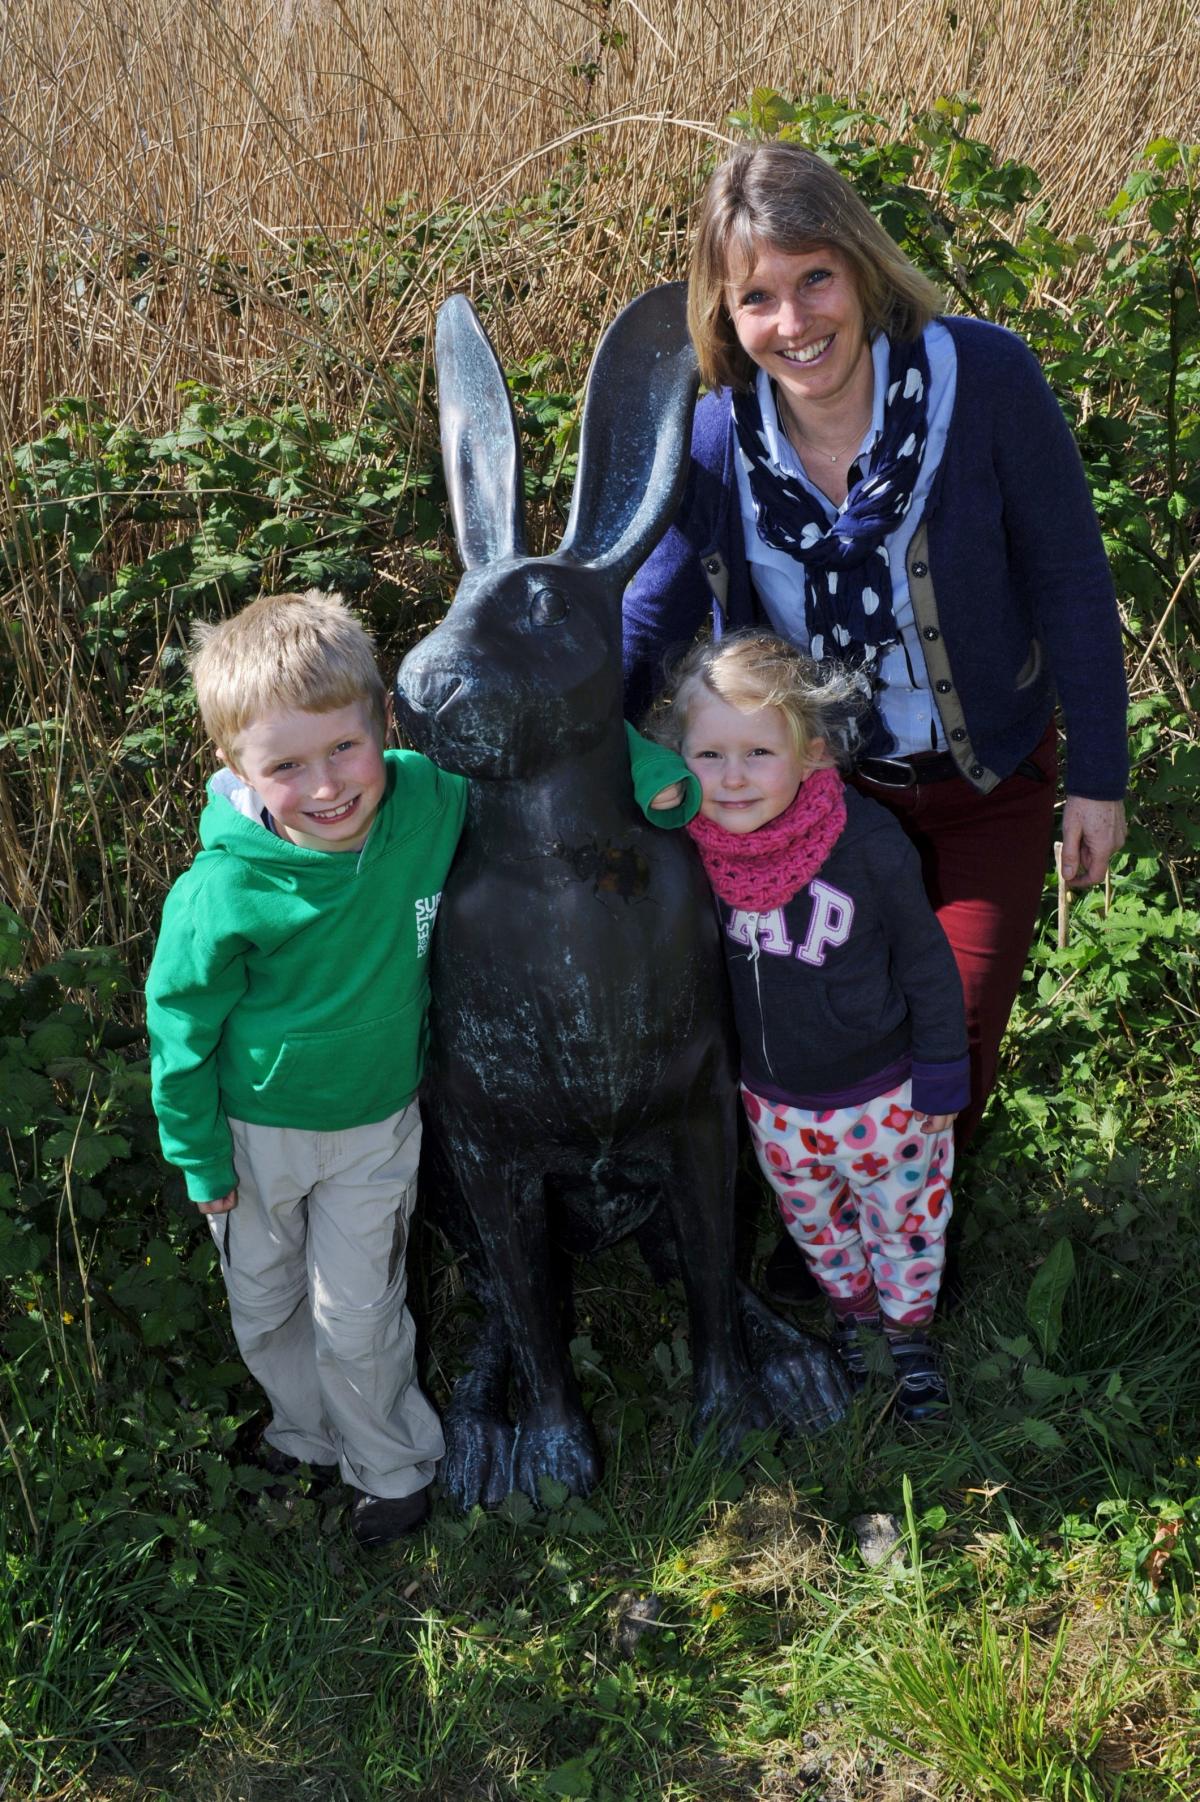 Jill Bewley, Communication and Events Manager at Cotswold Water Park shows visitors Thomas, 6, and Heidi Weeks, 4, the new hare by TV presenter Ellie Harrison at the Gateway Centre